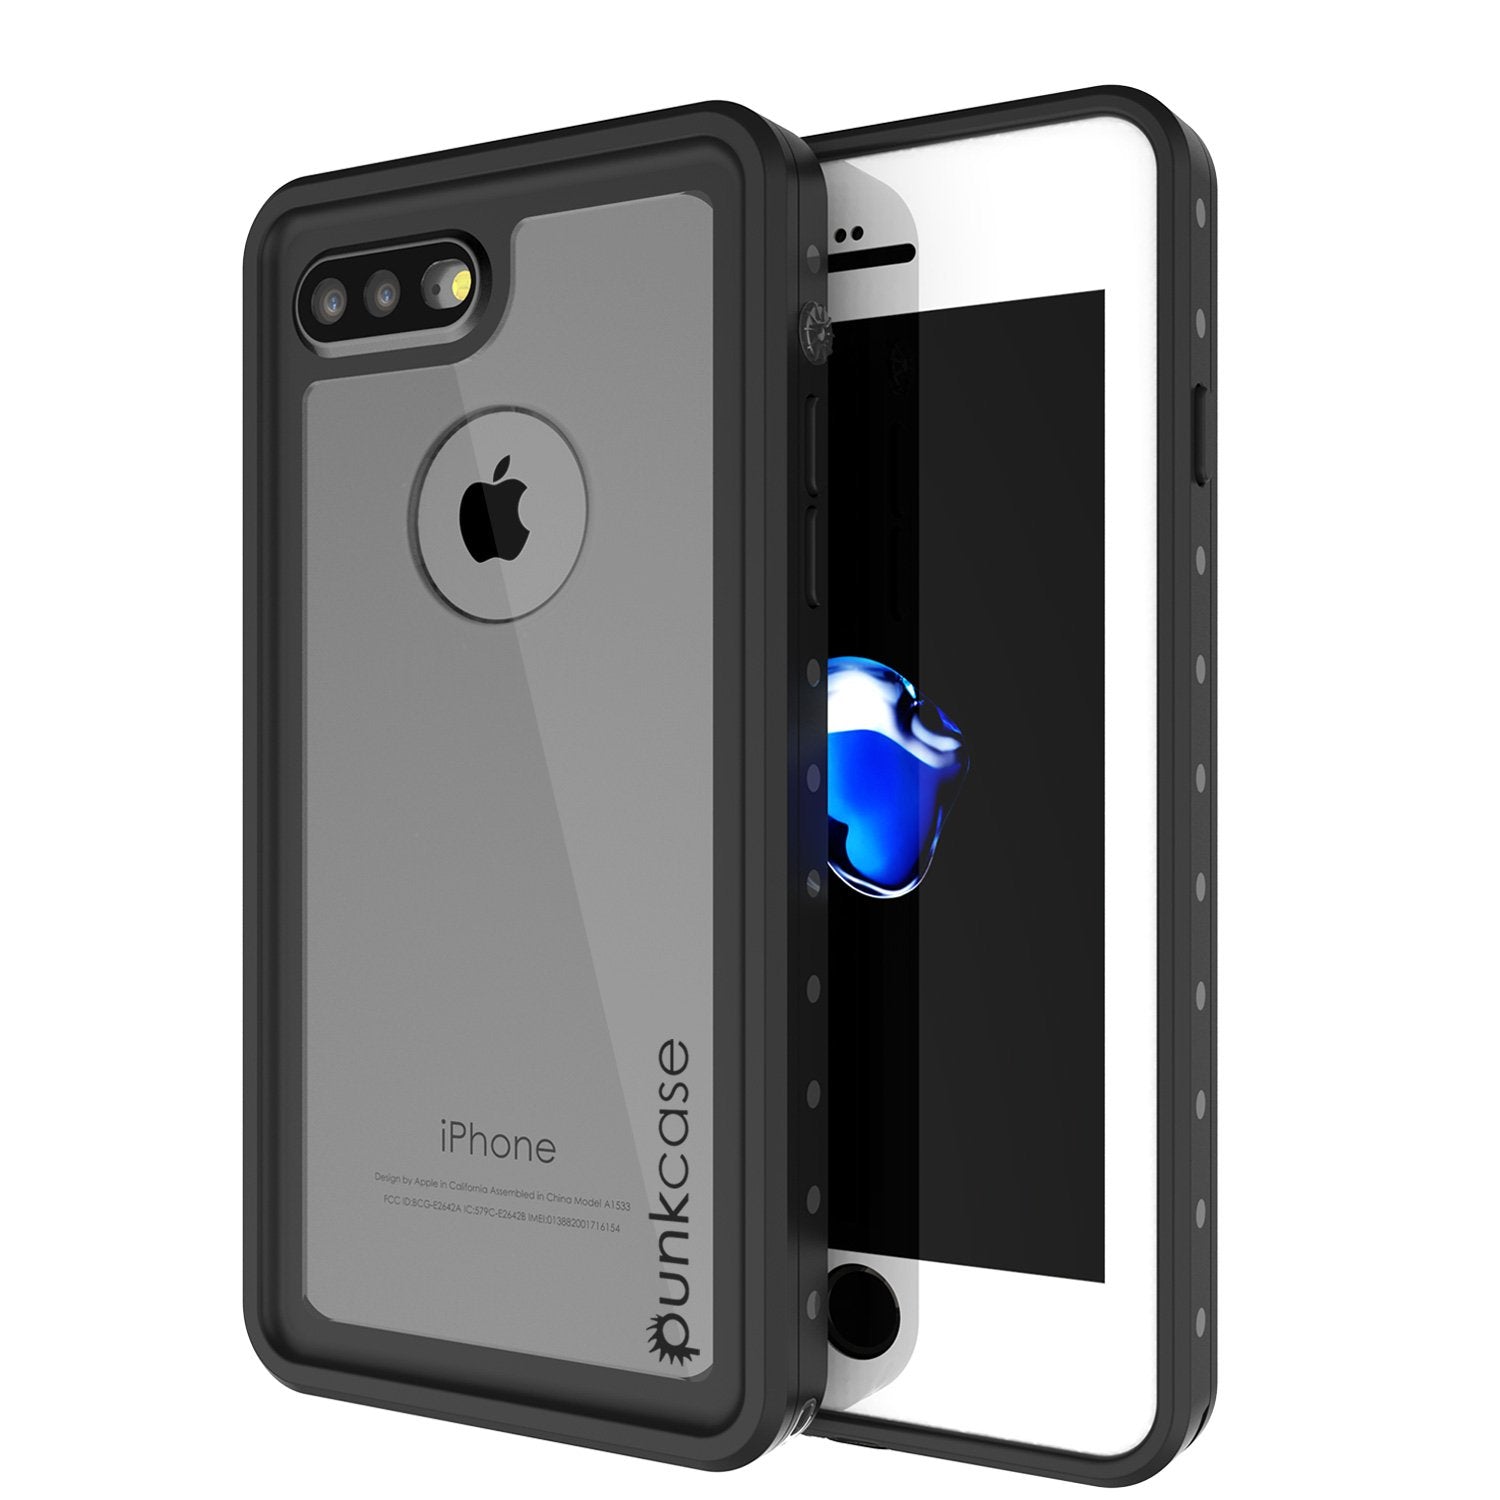 iPhone 8+ Plus Case, Punkcase CarbonShield, Heavy Duty & Ultra